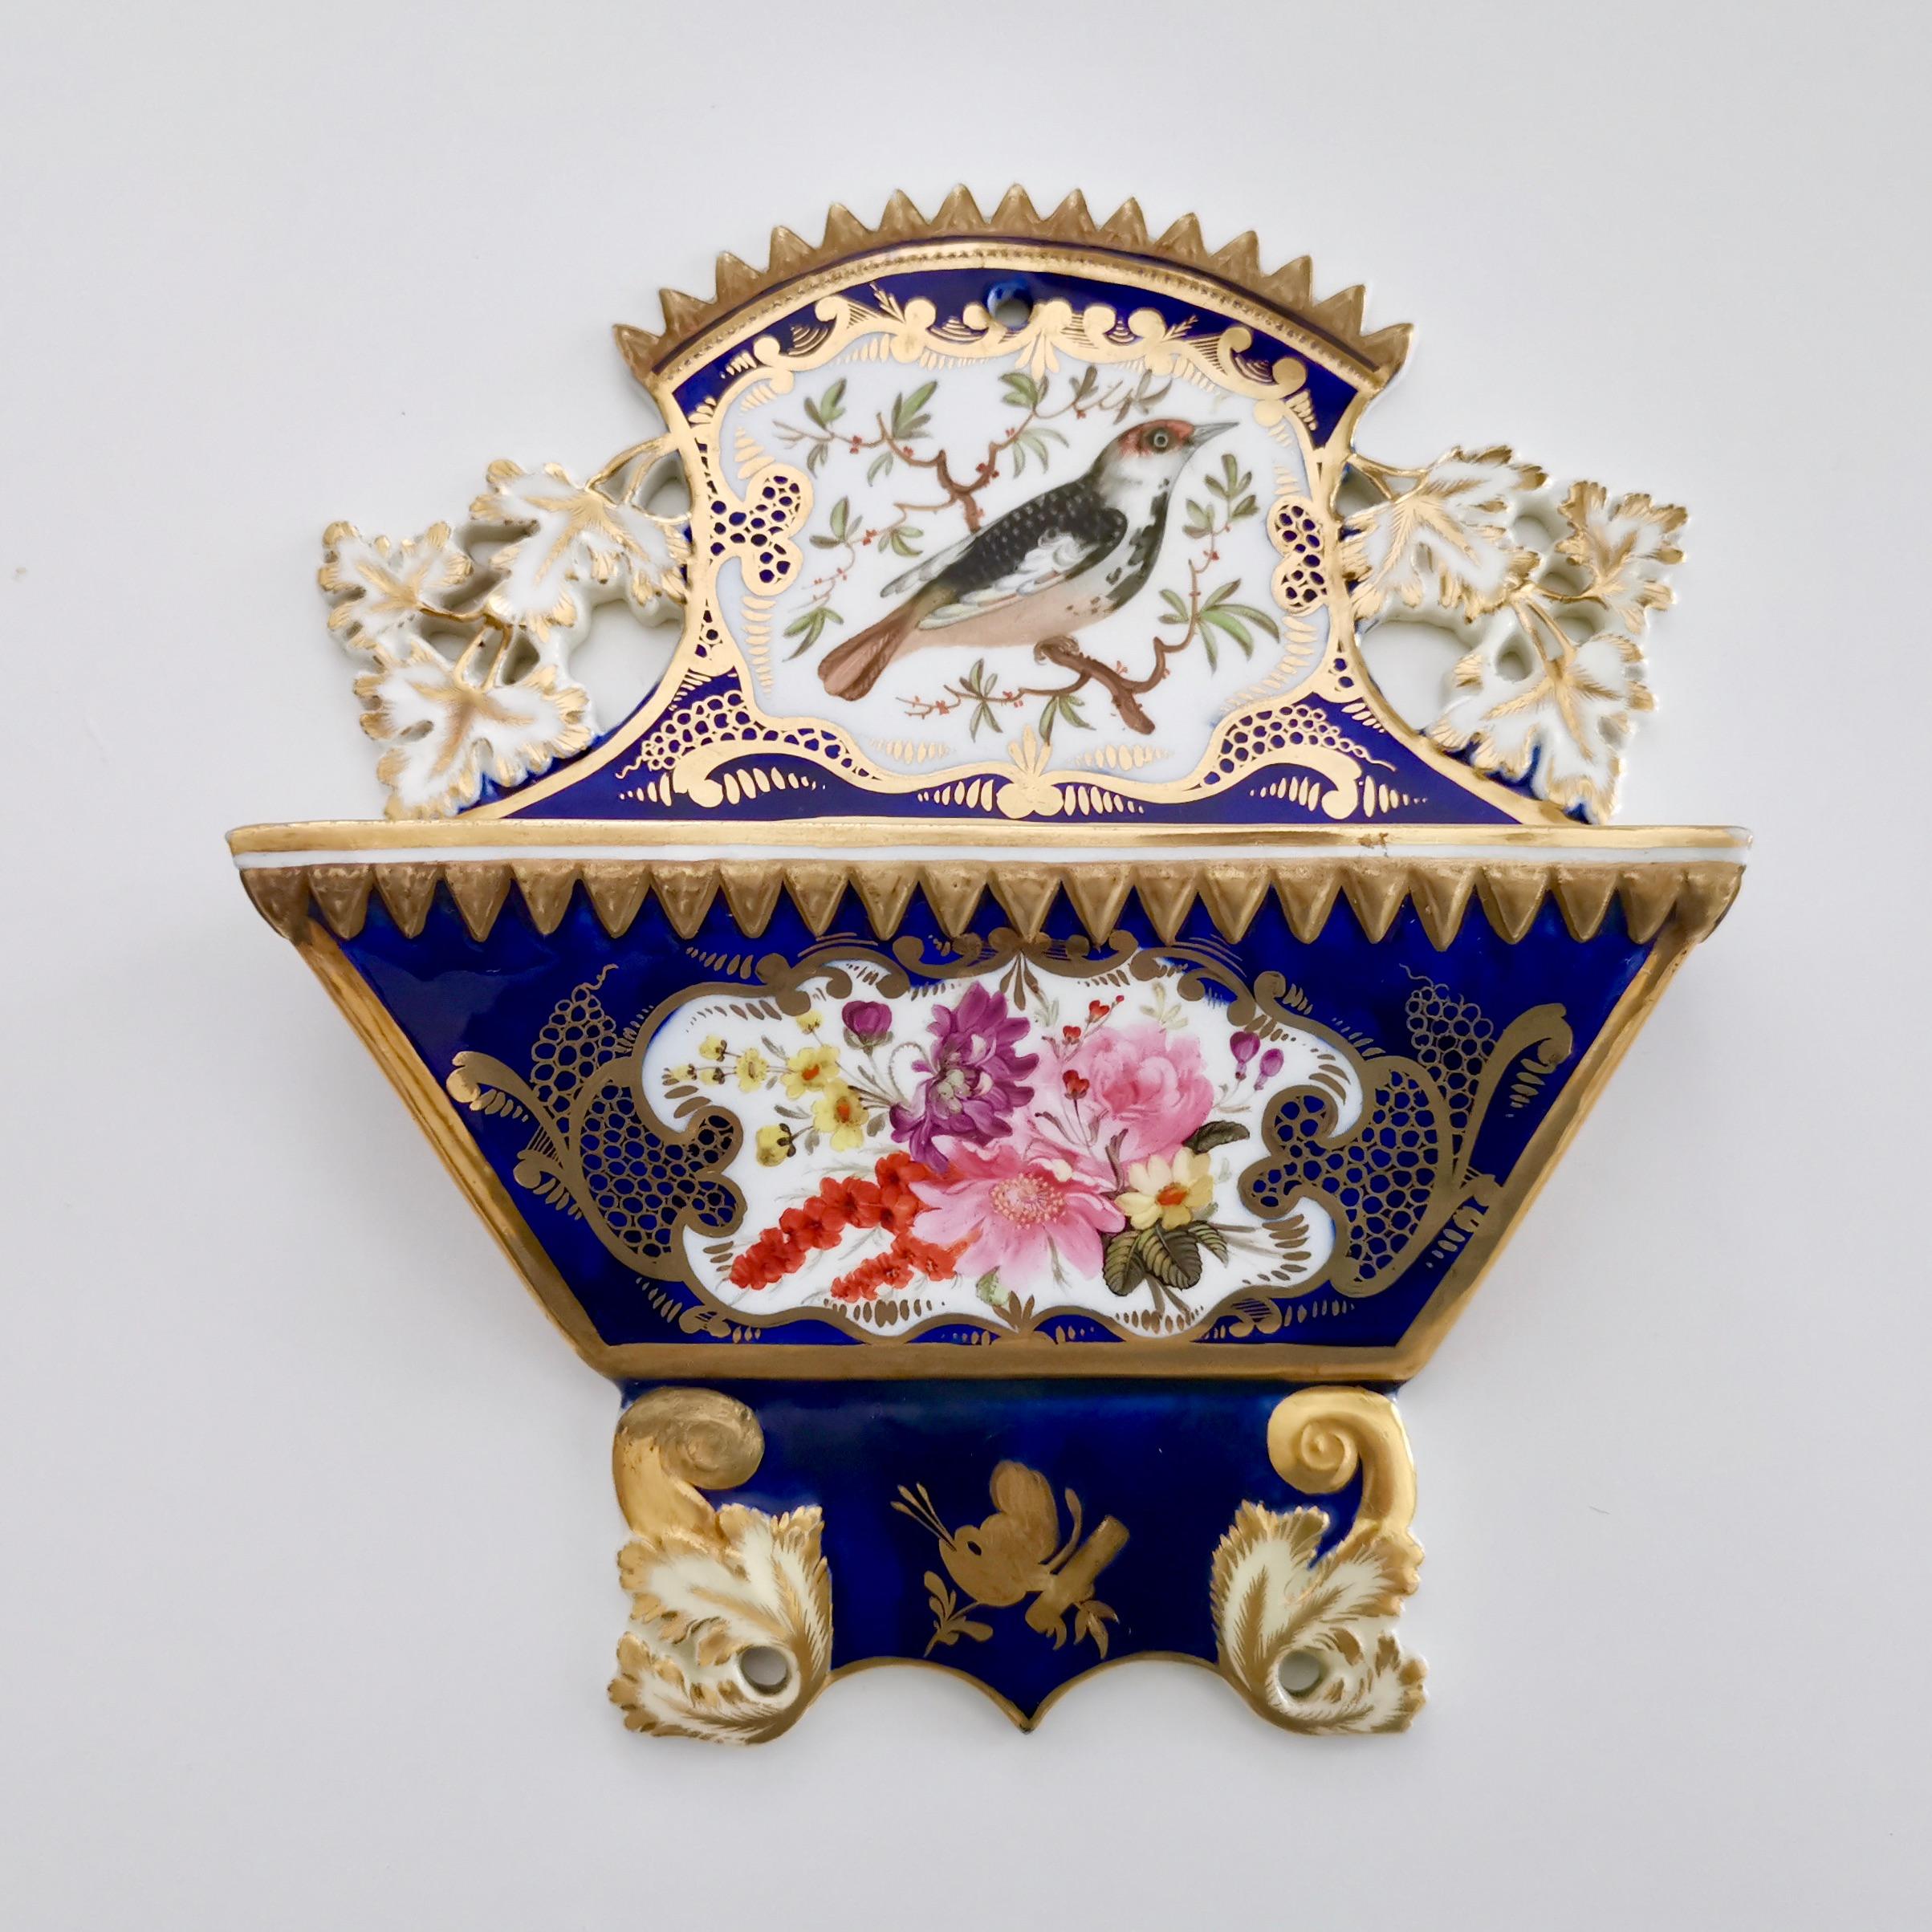 This is a stunning pair of porcelain letter racks made by Coalport between about 1815 and 1820. The racks bear the famous and very wonderful bird pattern with the number 759. These racks were used in the entrance hall of the houses of the well to